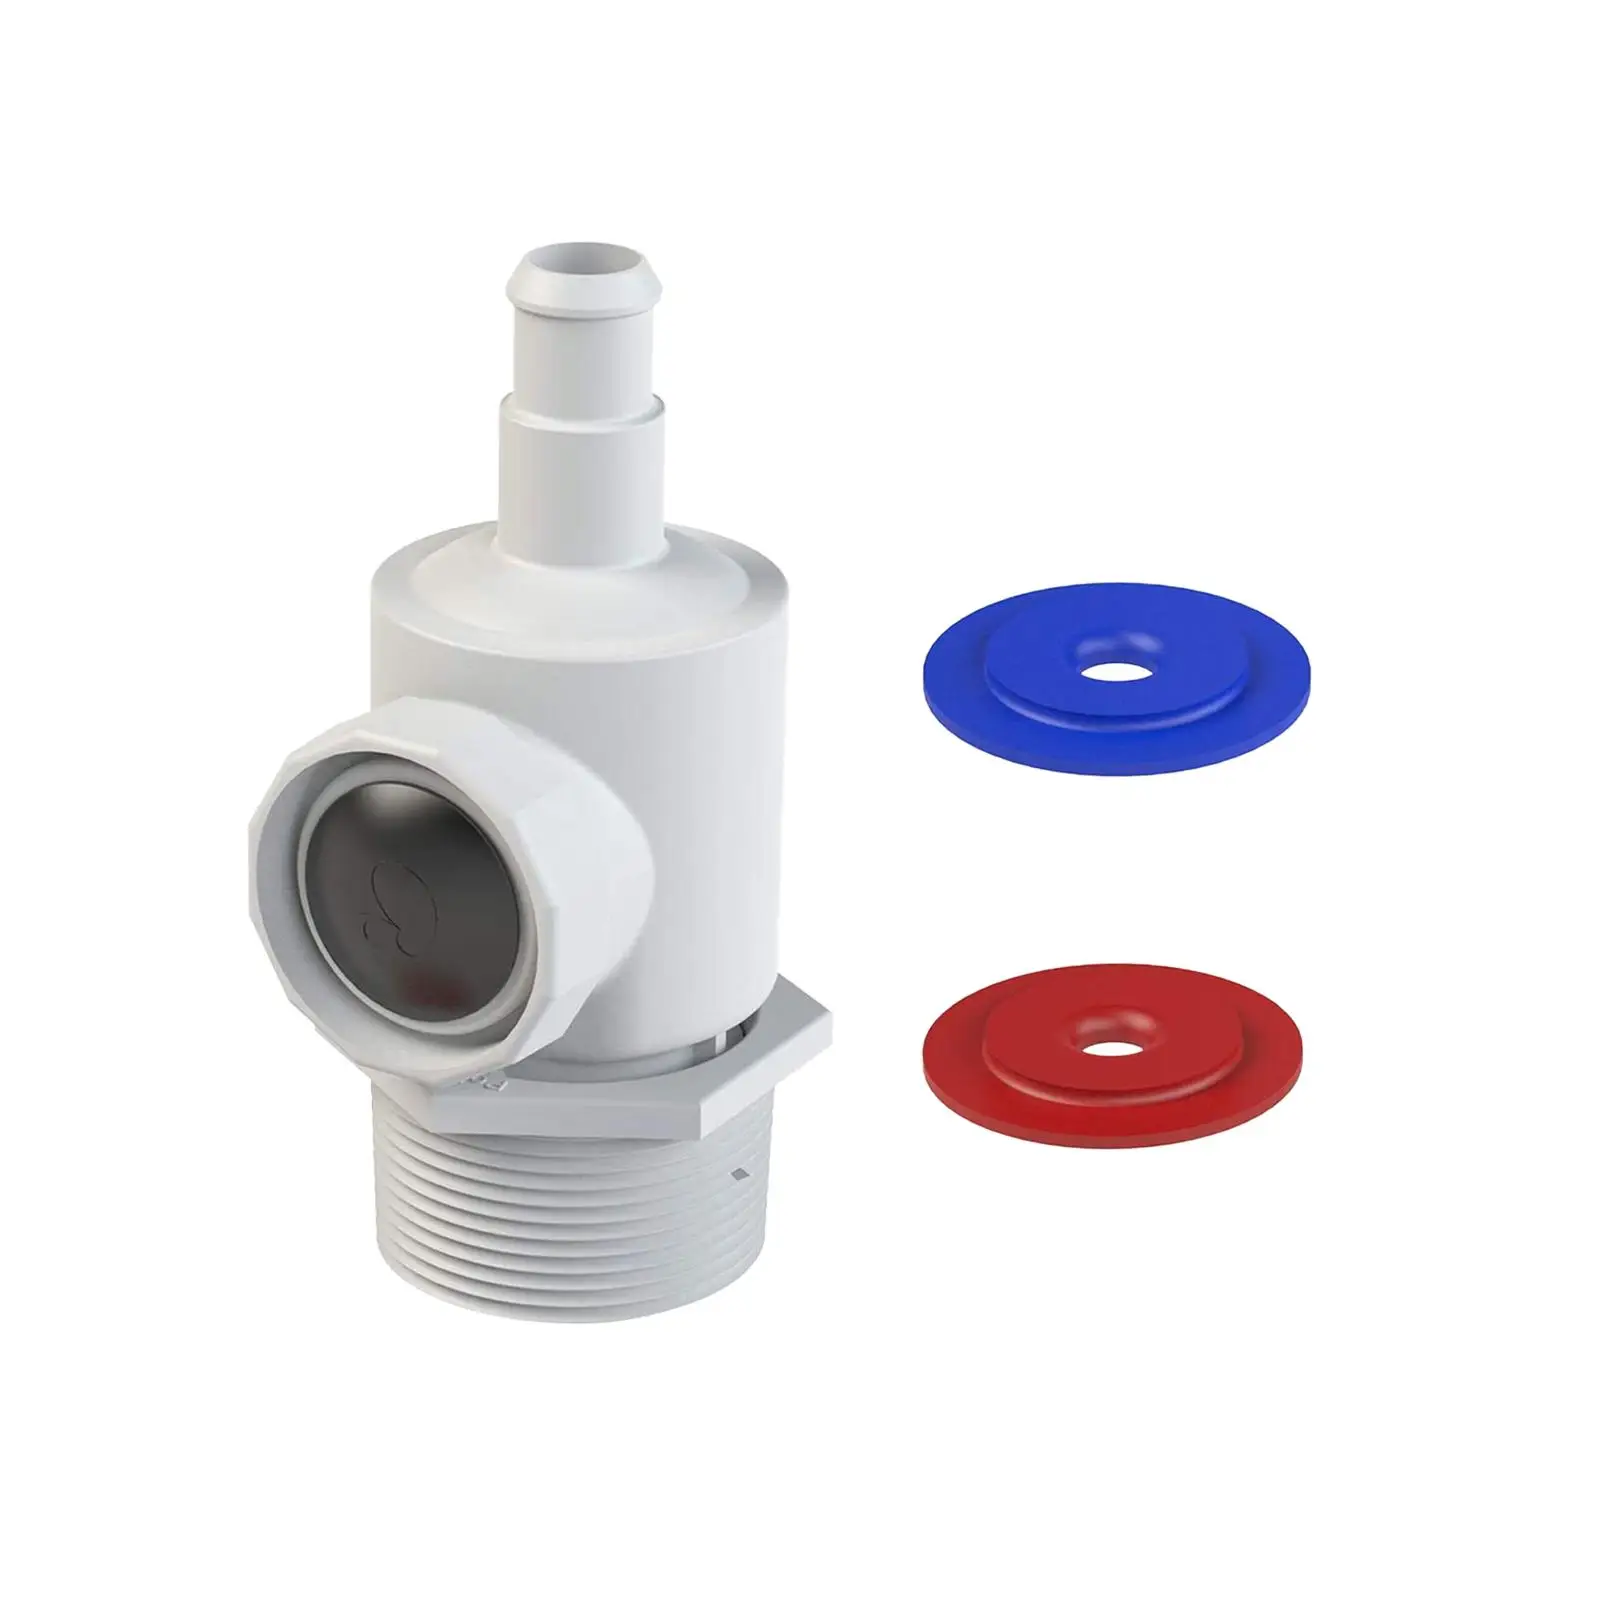 Wall Fitting Connector Assembly Durable Universal Easy to Install Pool Accessory for 180 380 280 Pool Cleaning Machine